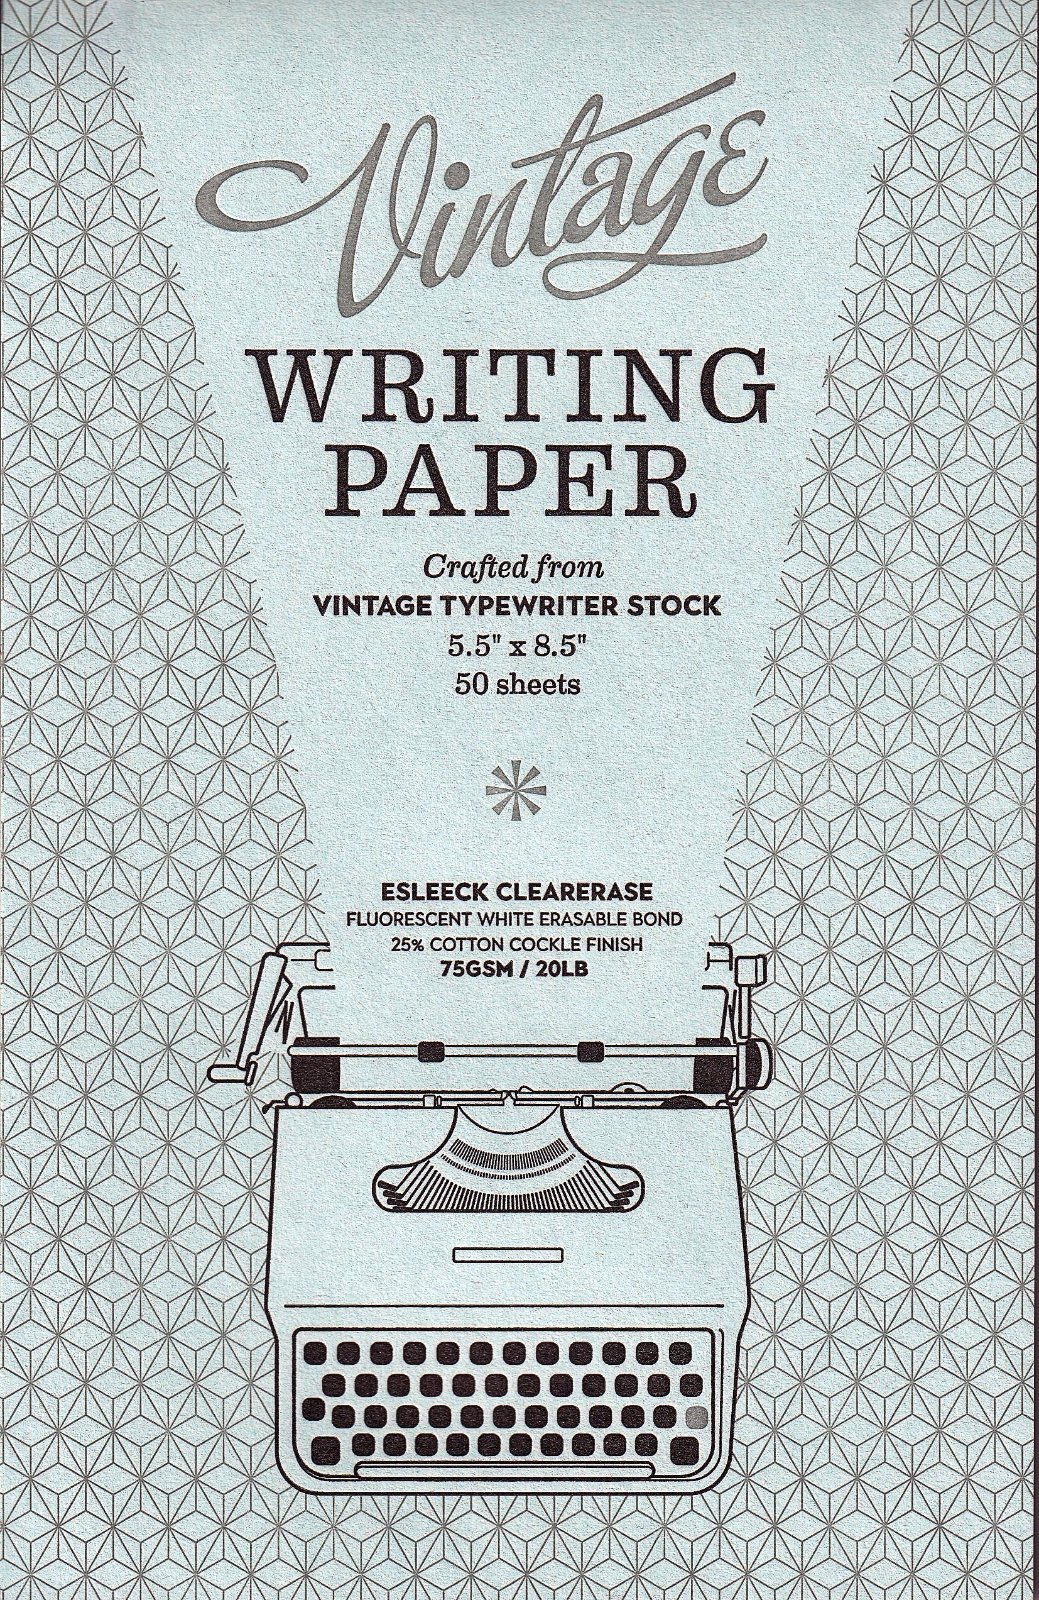 Antique typewriter paper. Goals for 2016. Business concept